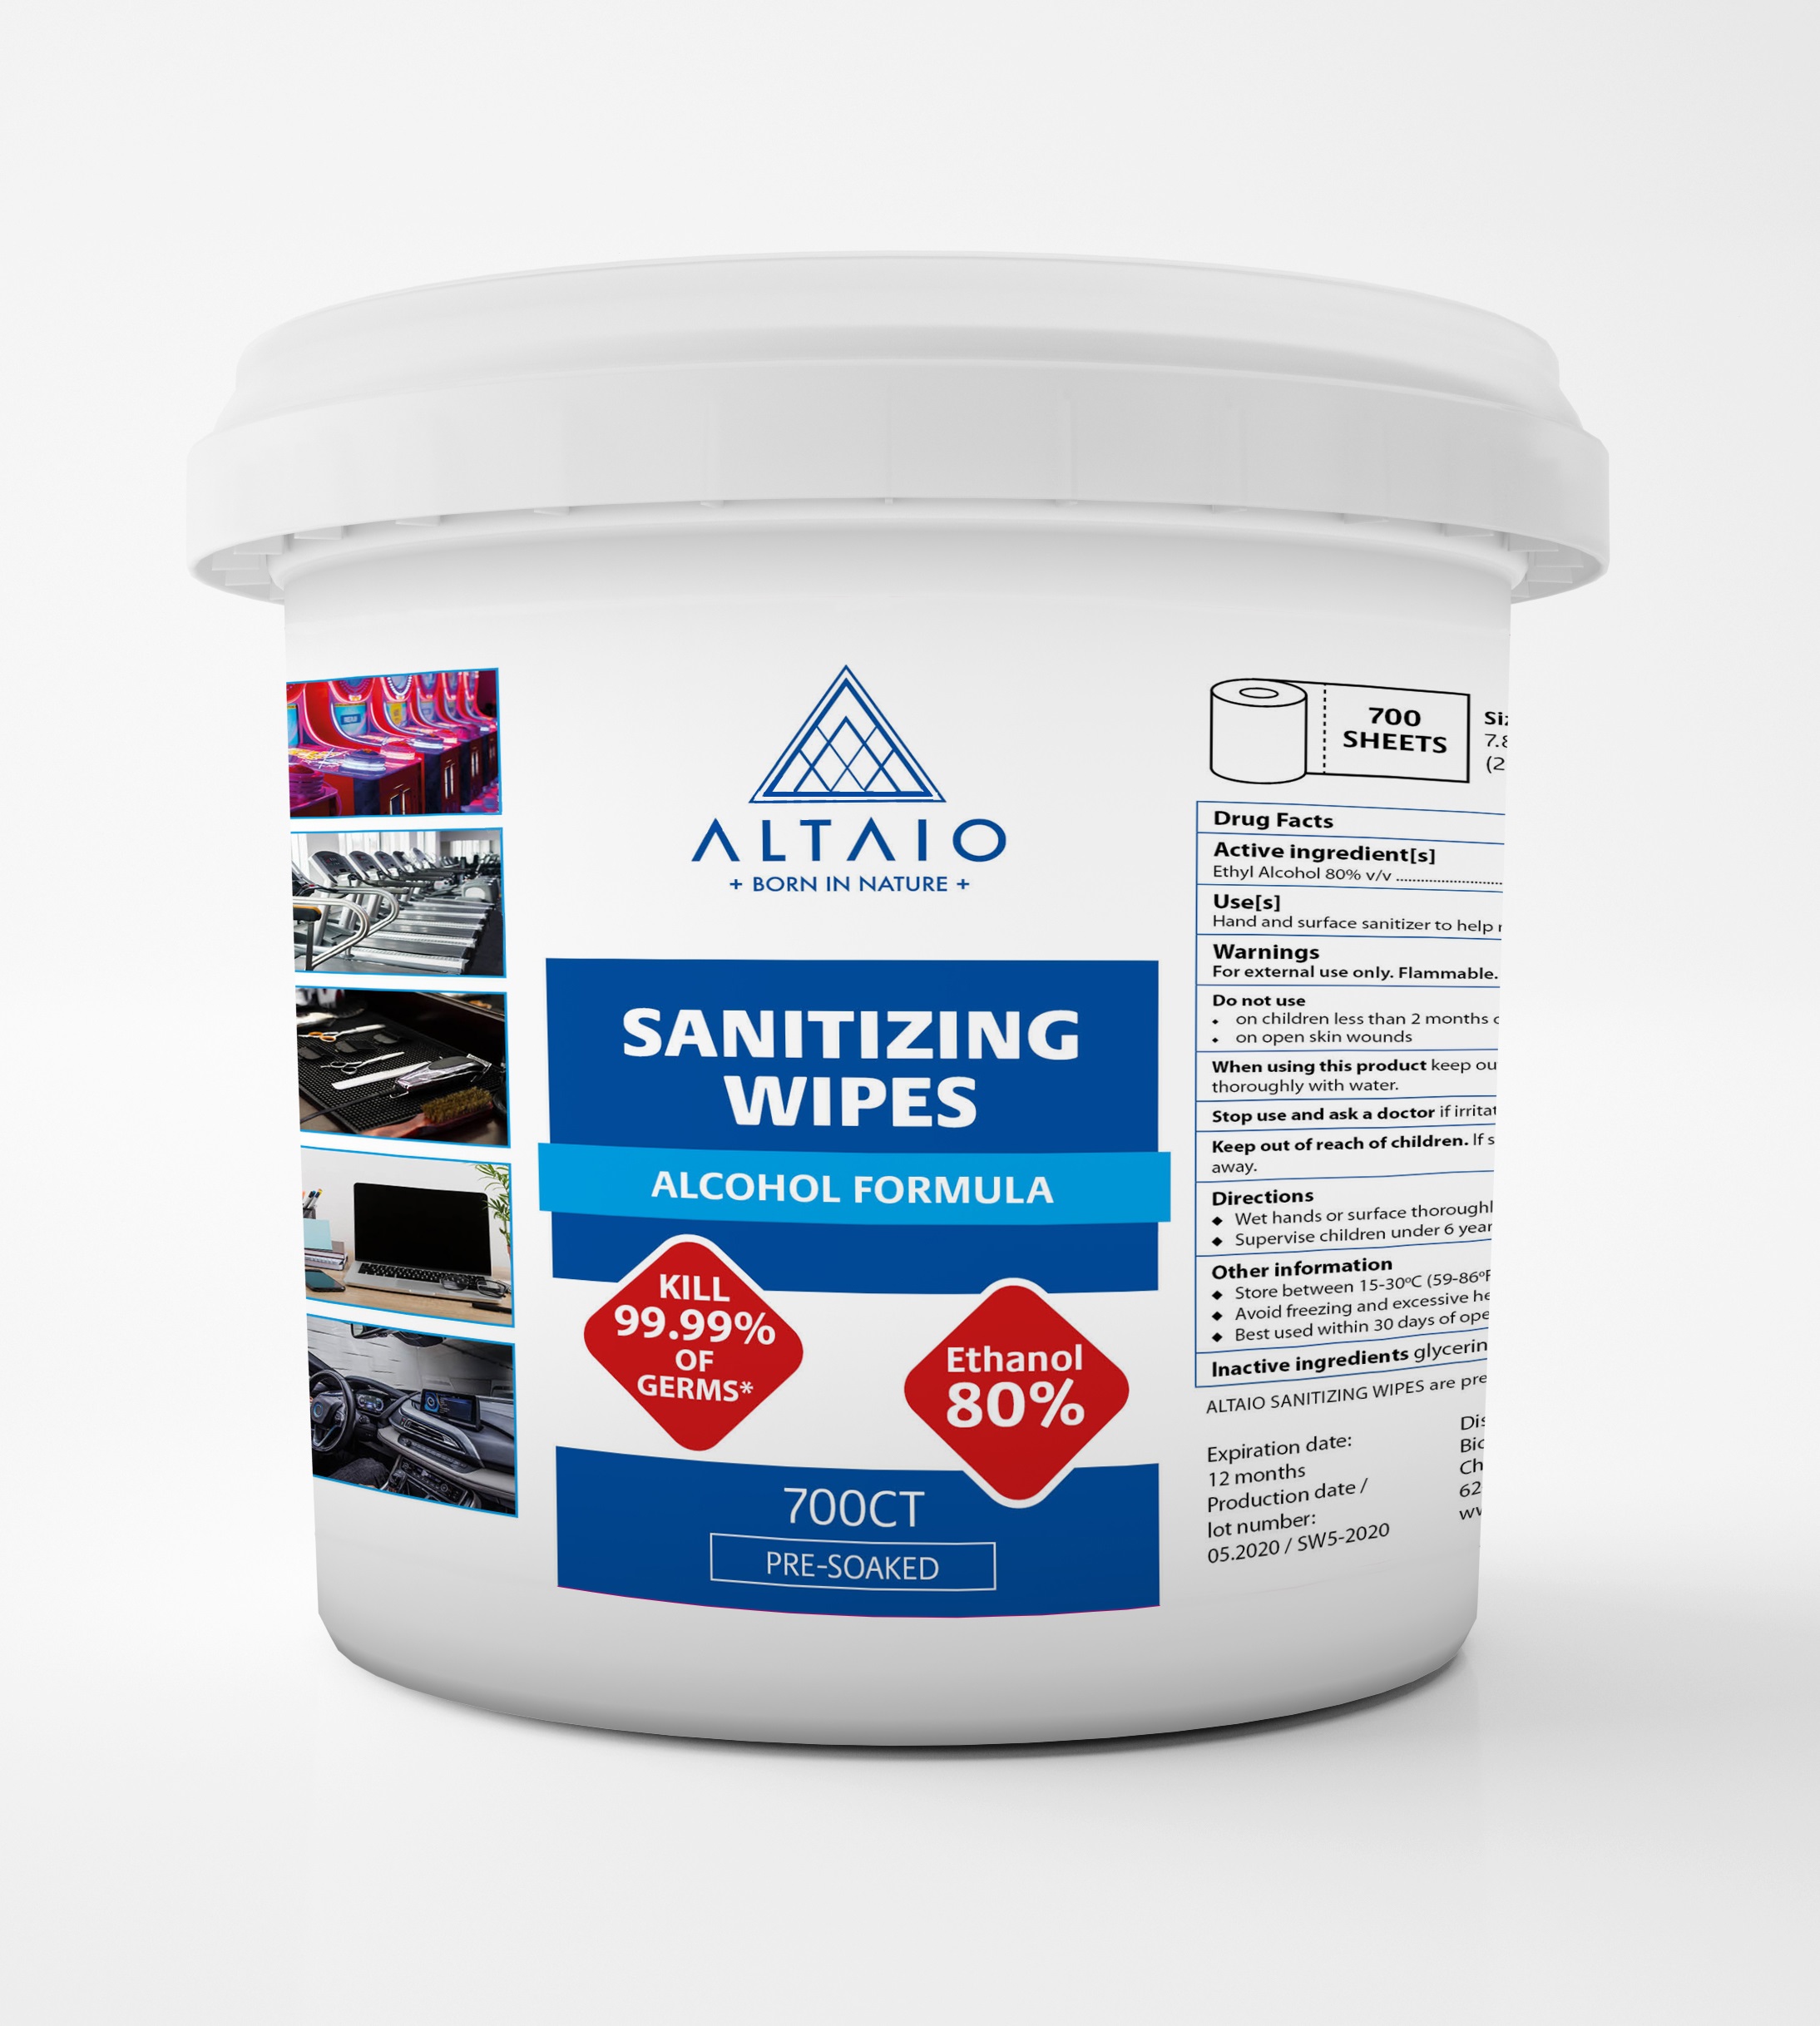 ALTAIO Sanitizing Wipes package